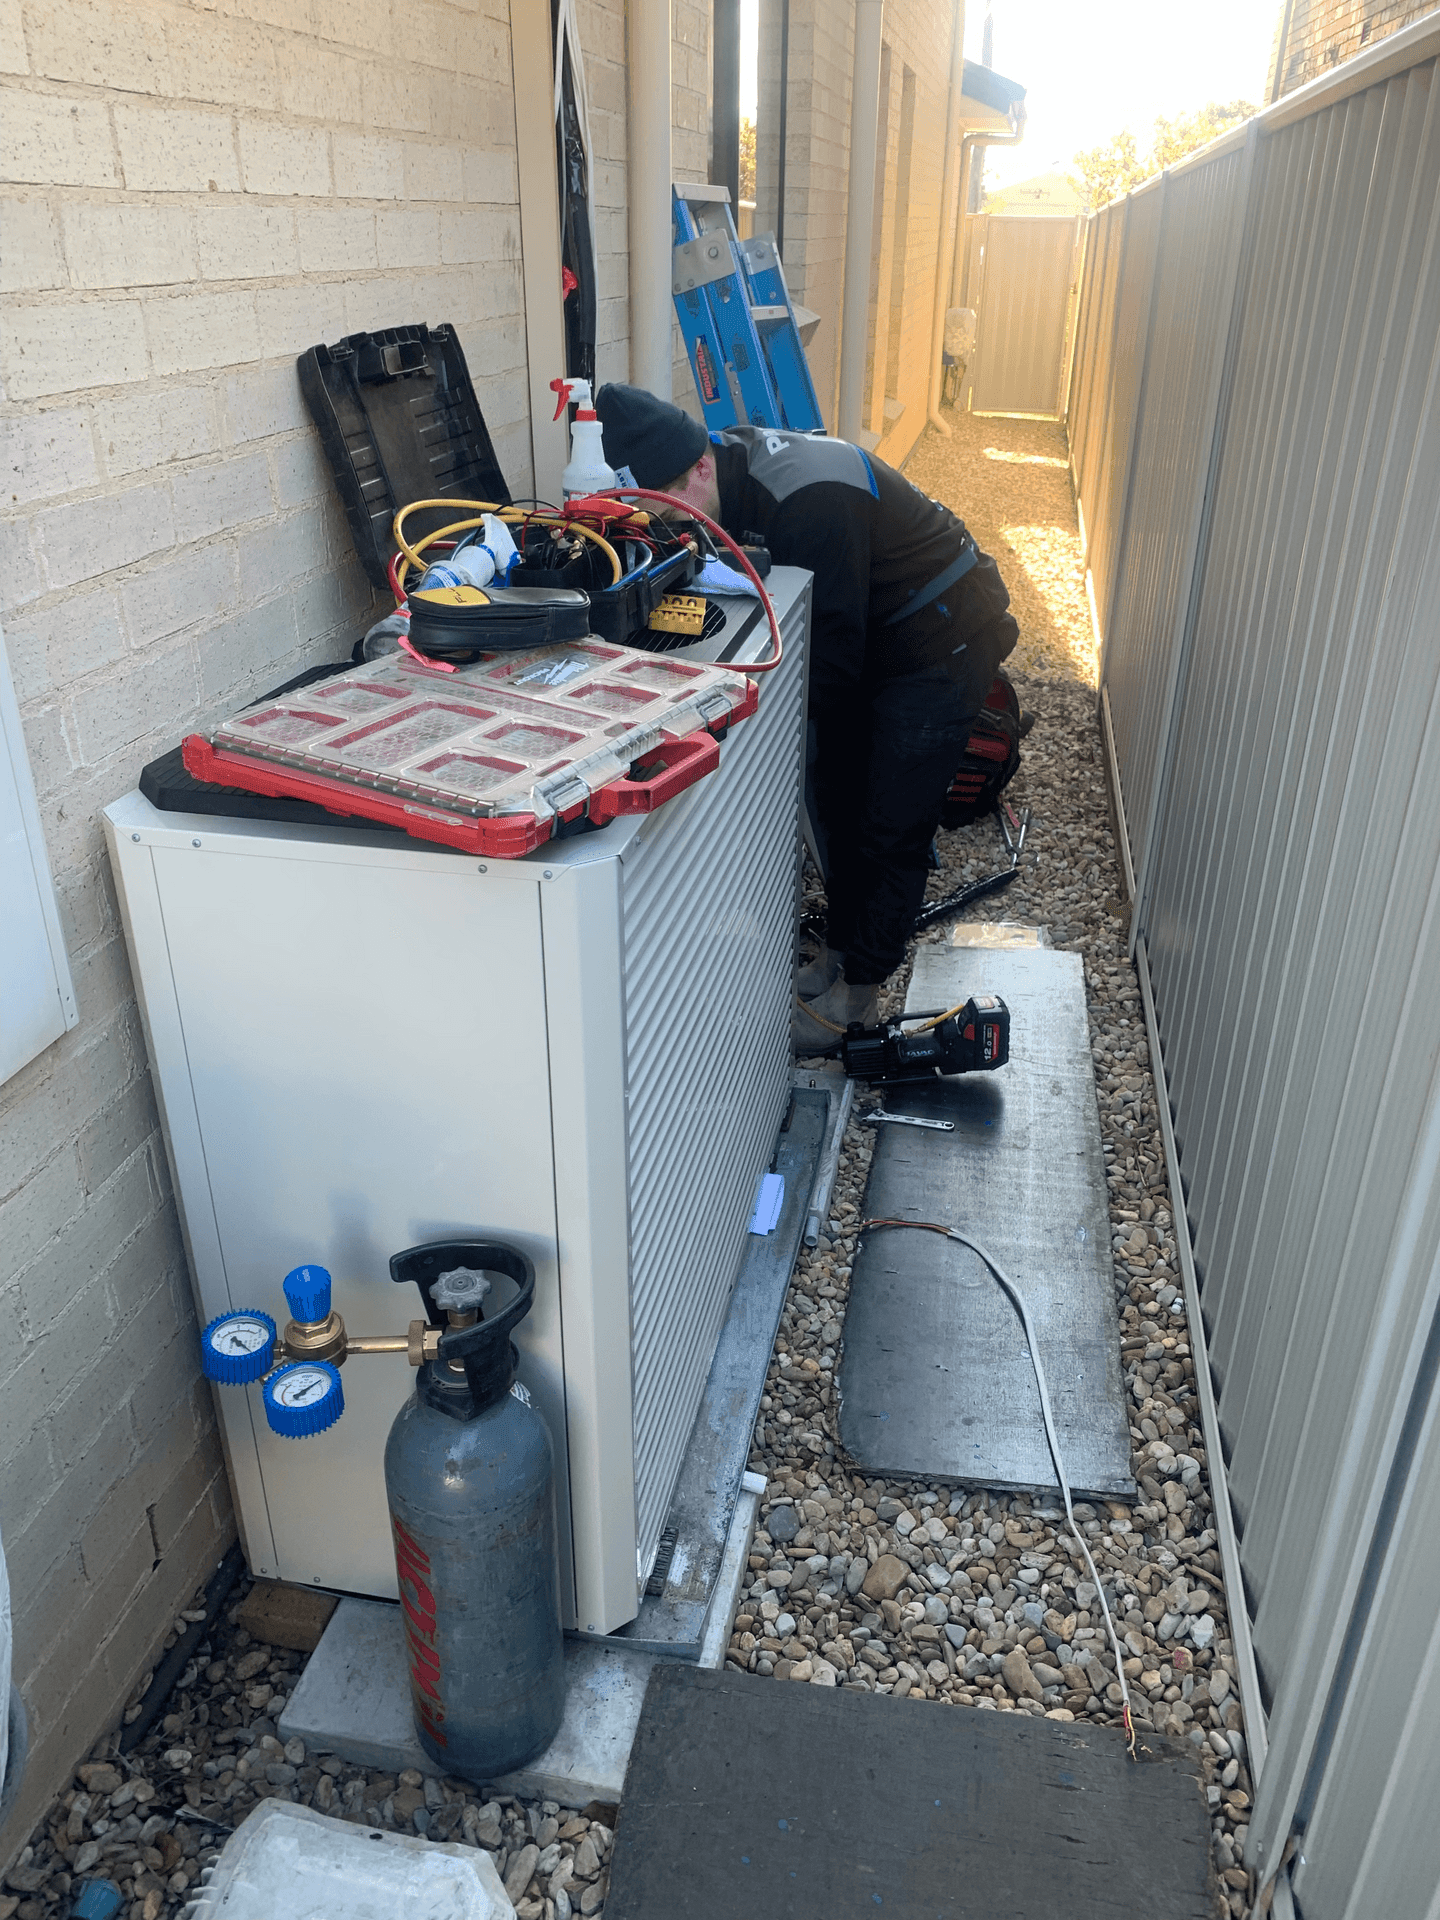 Seabreeze Air Conditioning technician repairs a faulty air conditioner at a house in Woonona